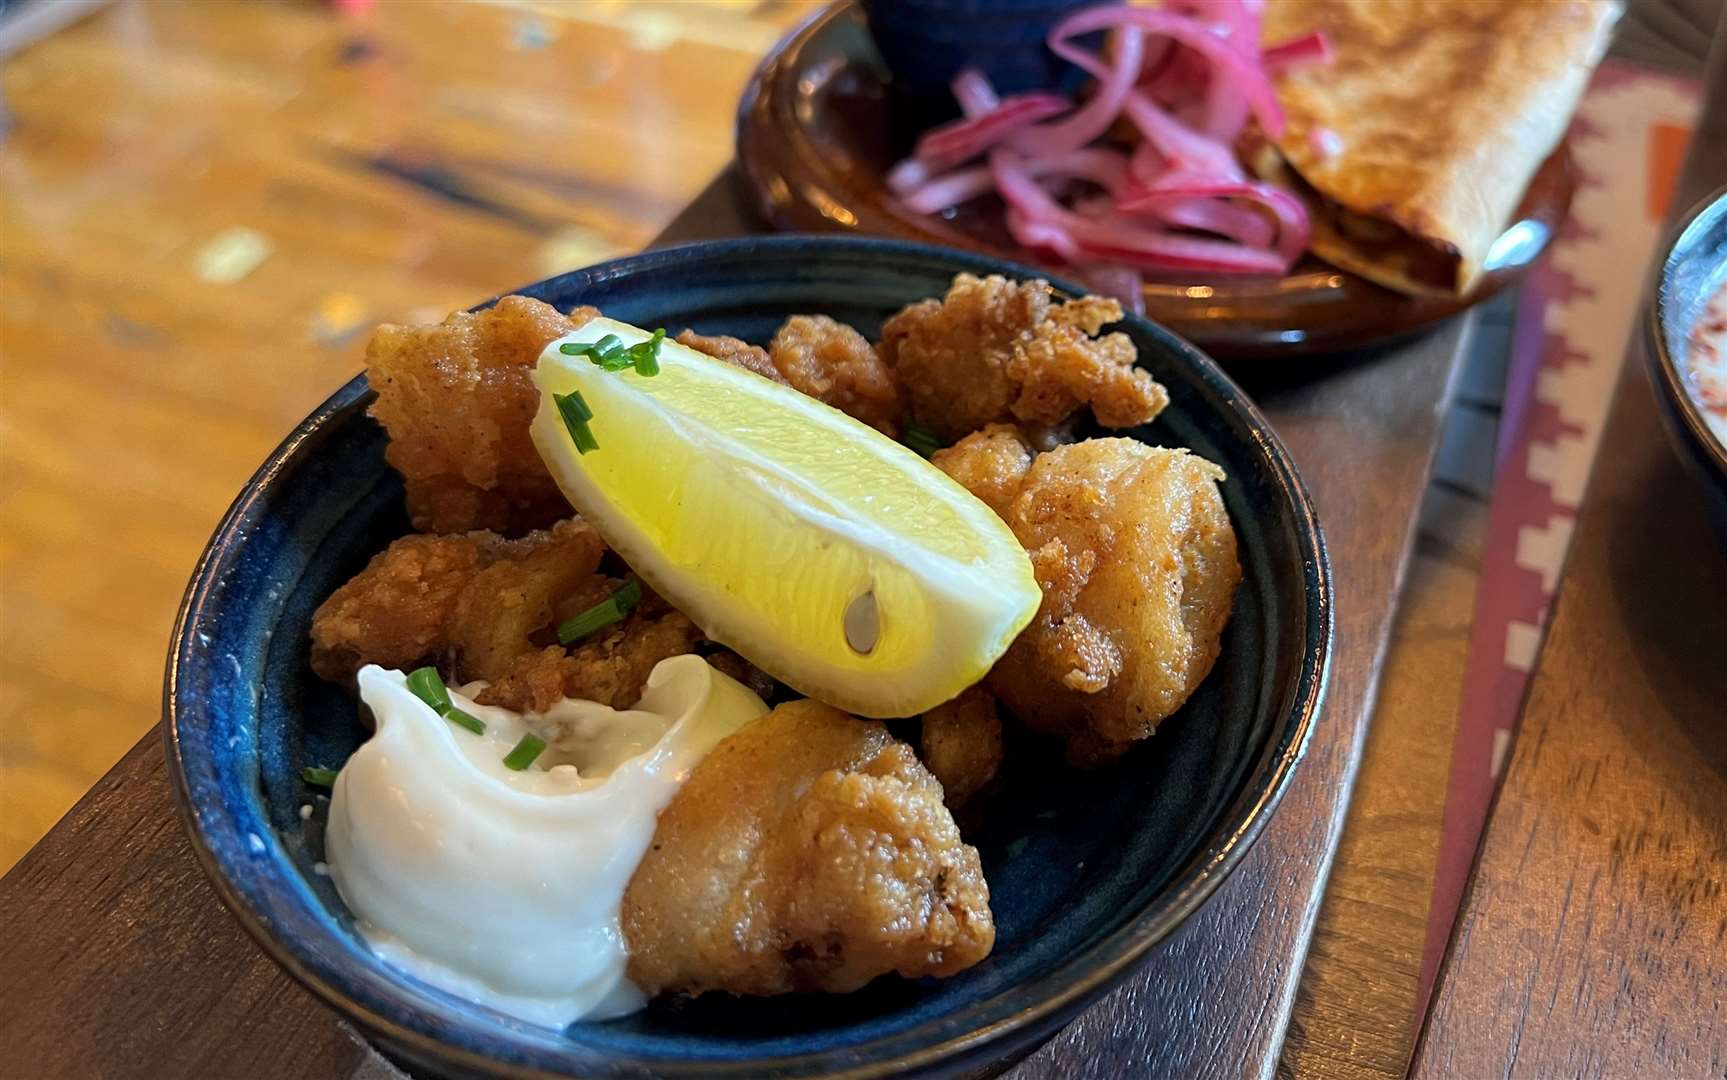 The salt and pepper squid...the standout dish